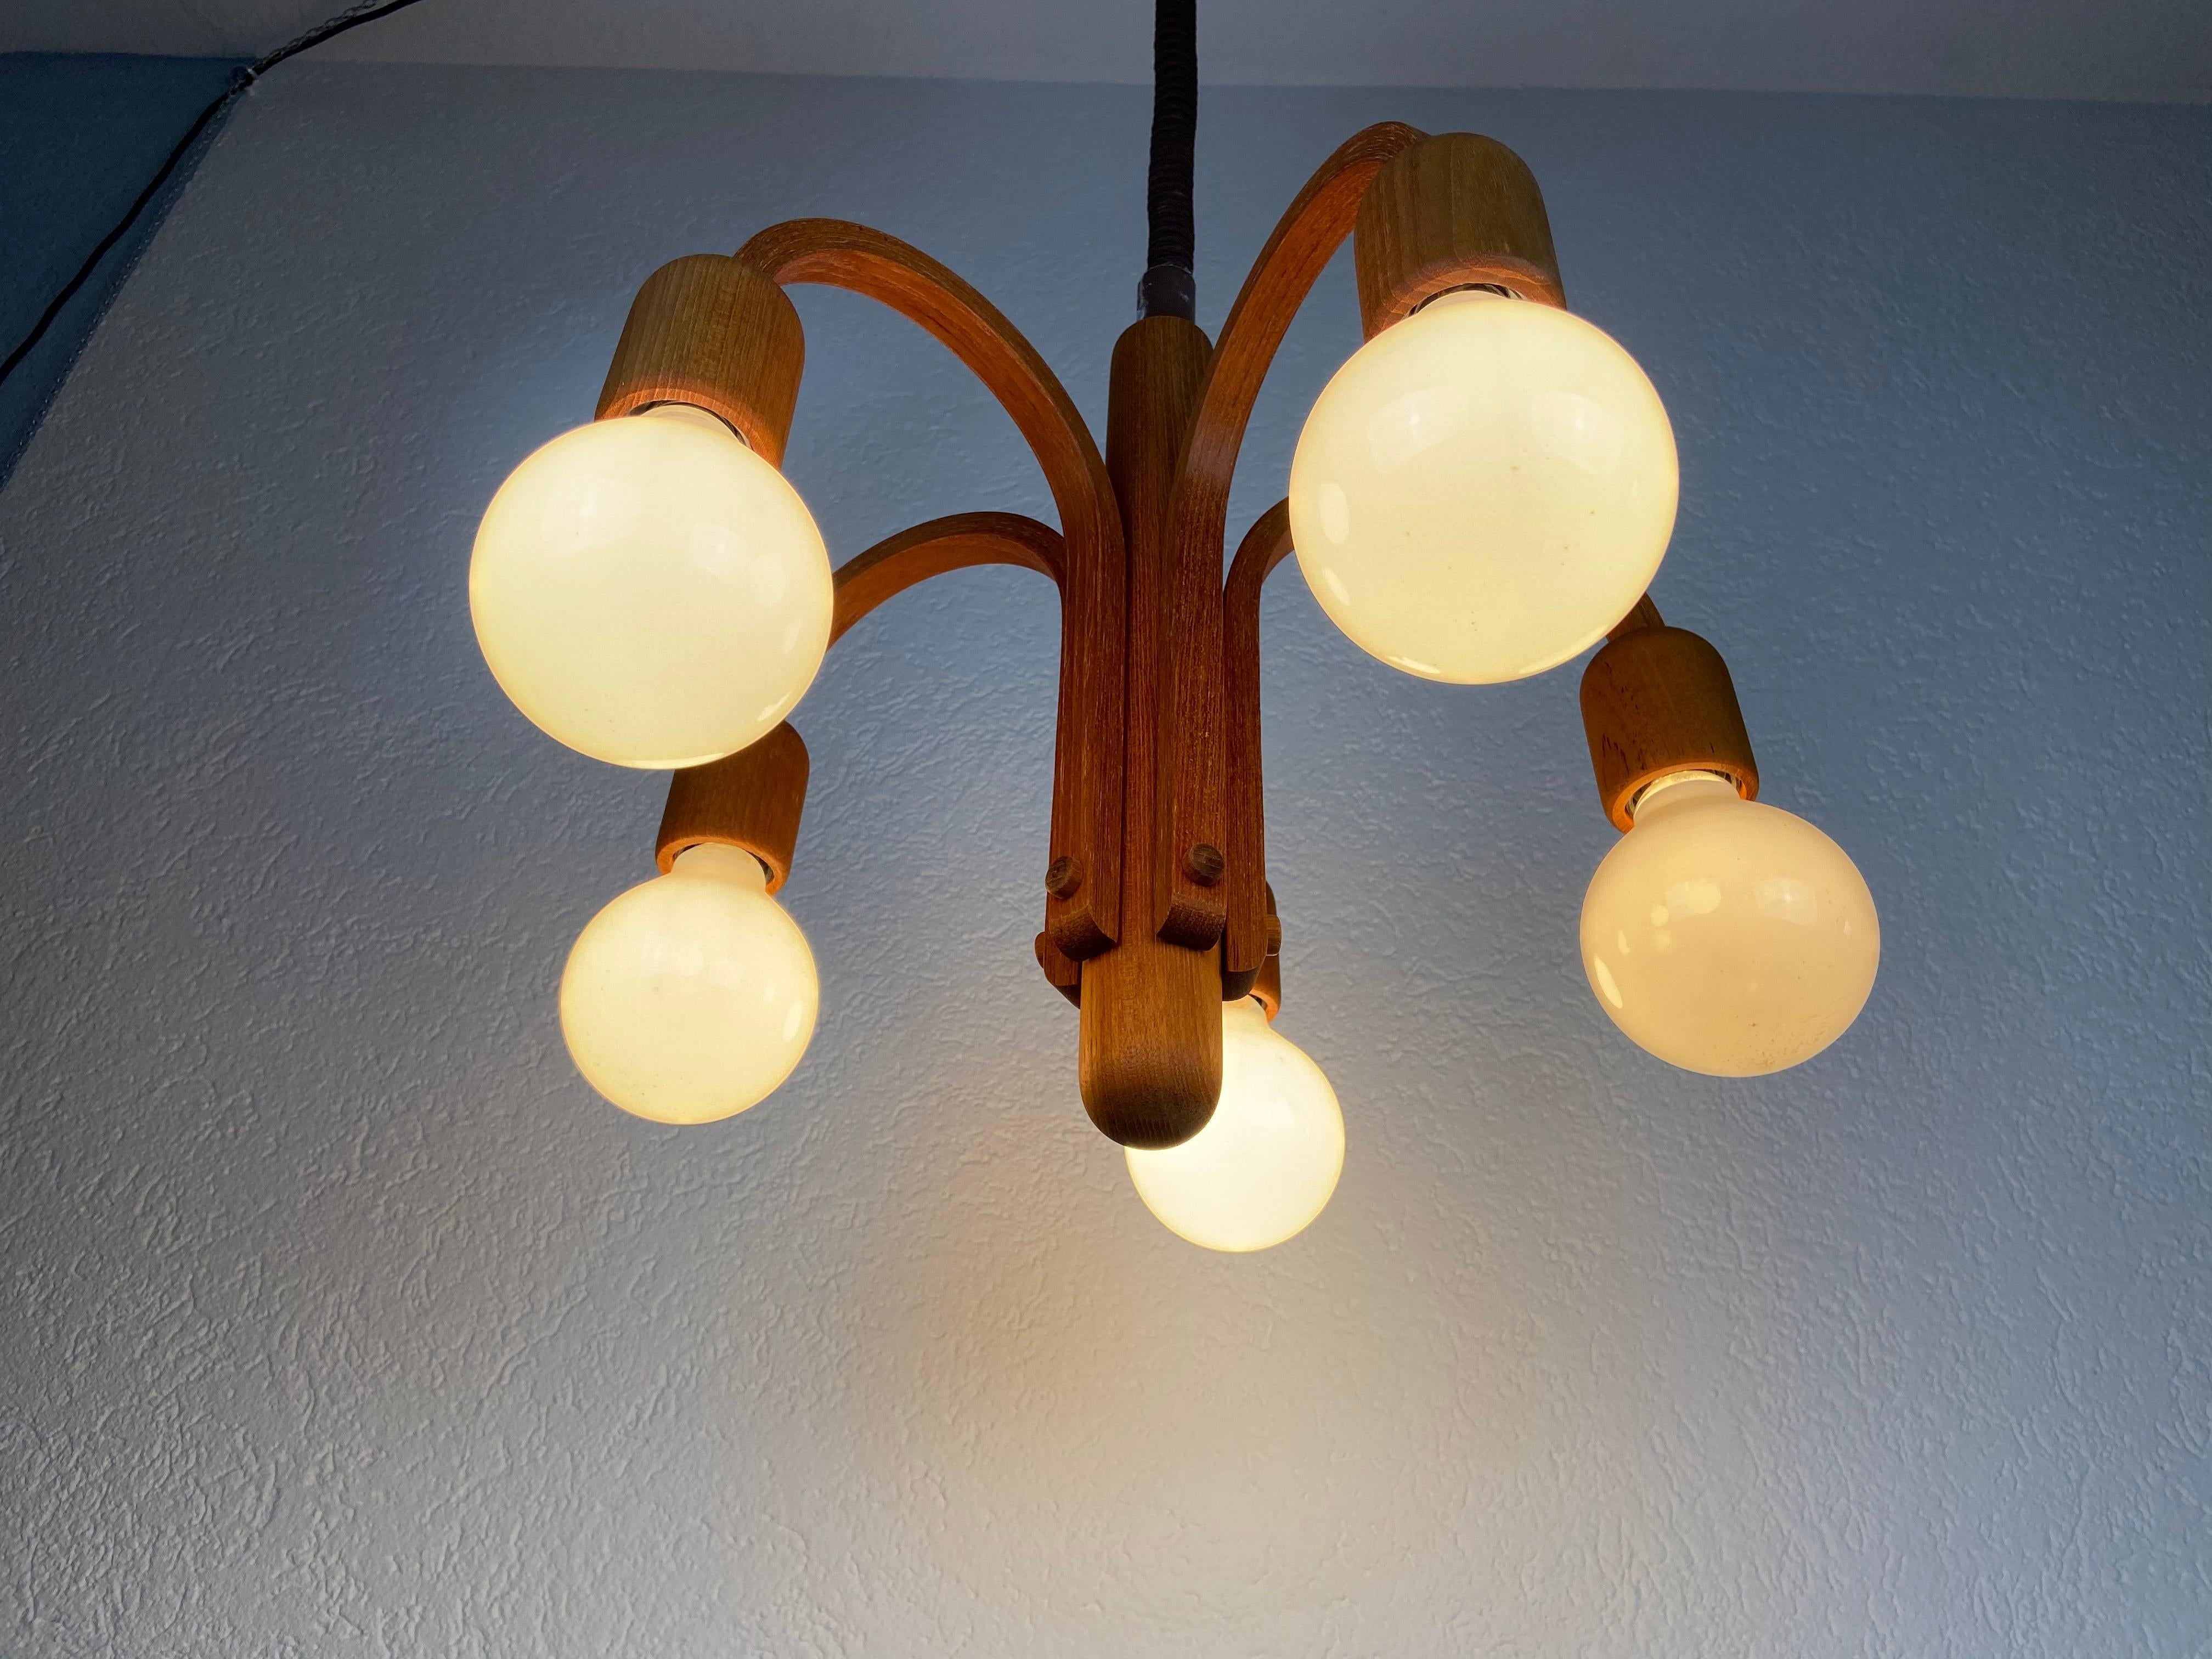 Textile Midcentury Teak Pendant Lamp with 5 Arms by Domus, 1960s